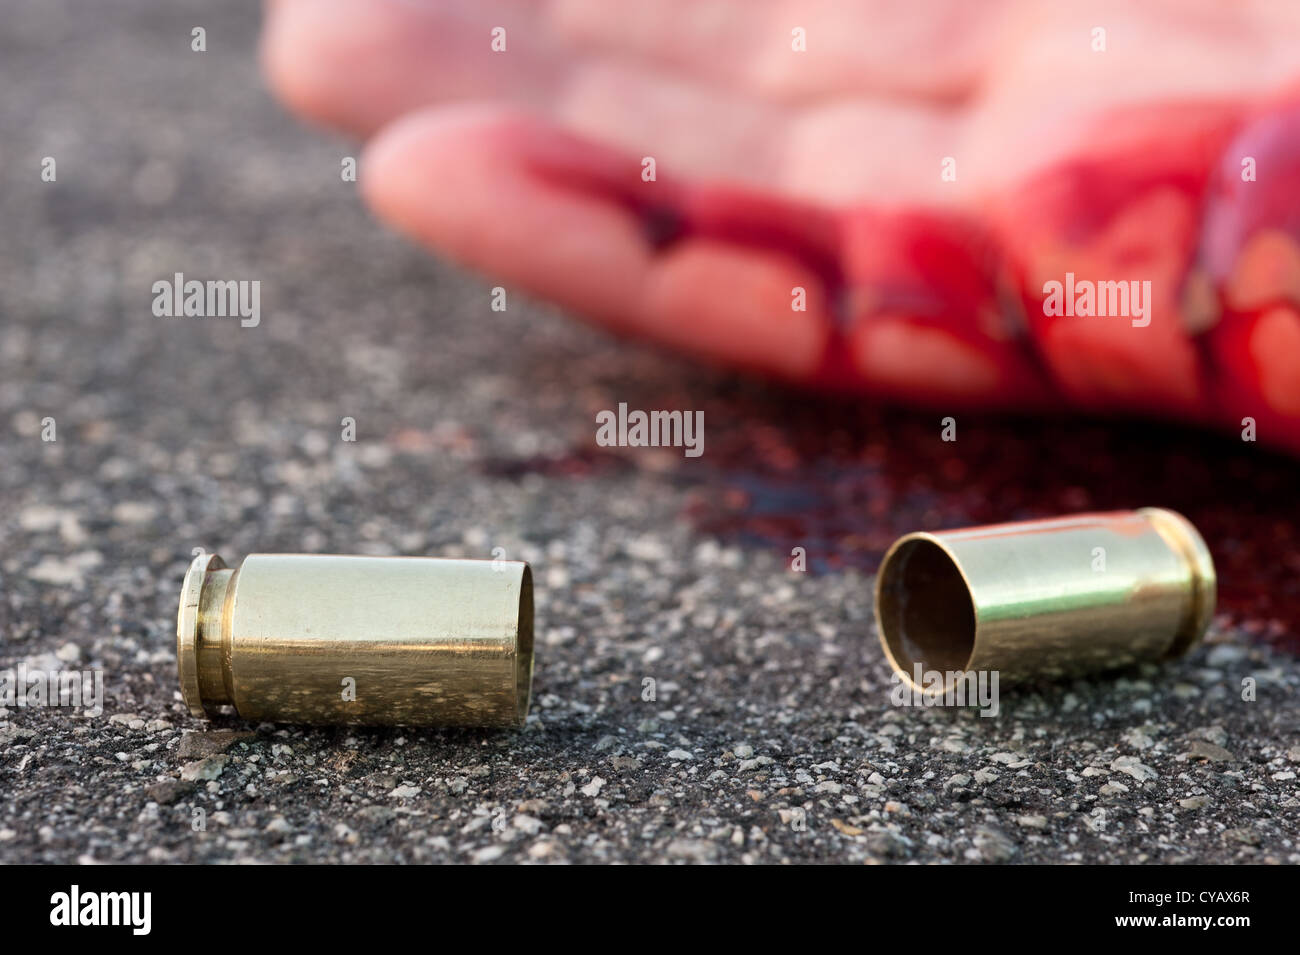 A man shot in the streets with the bullet casing laying next to a bloody hand. Stock Photo